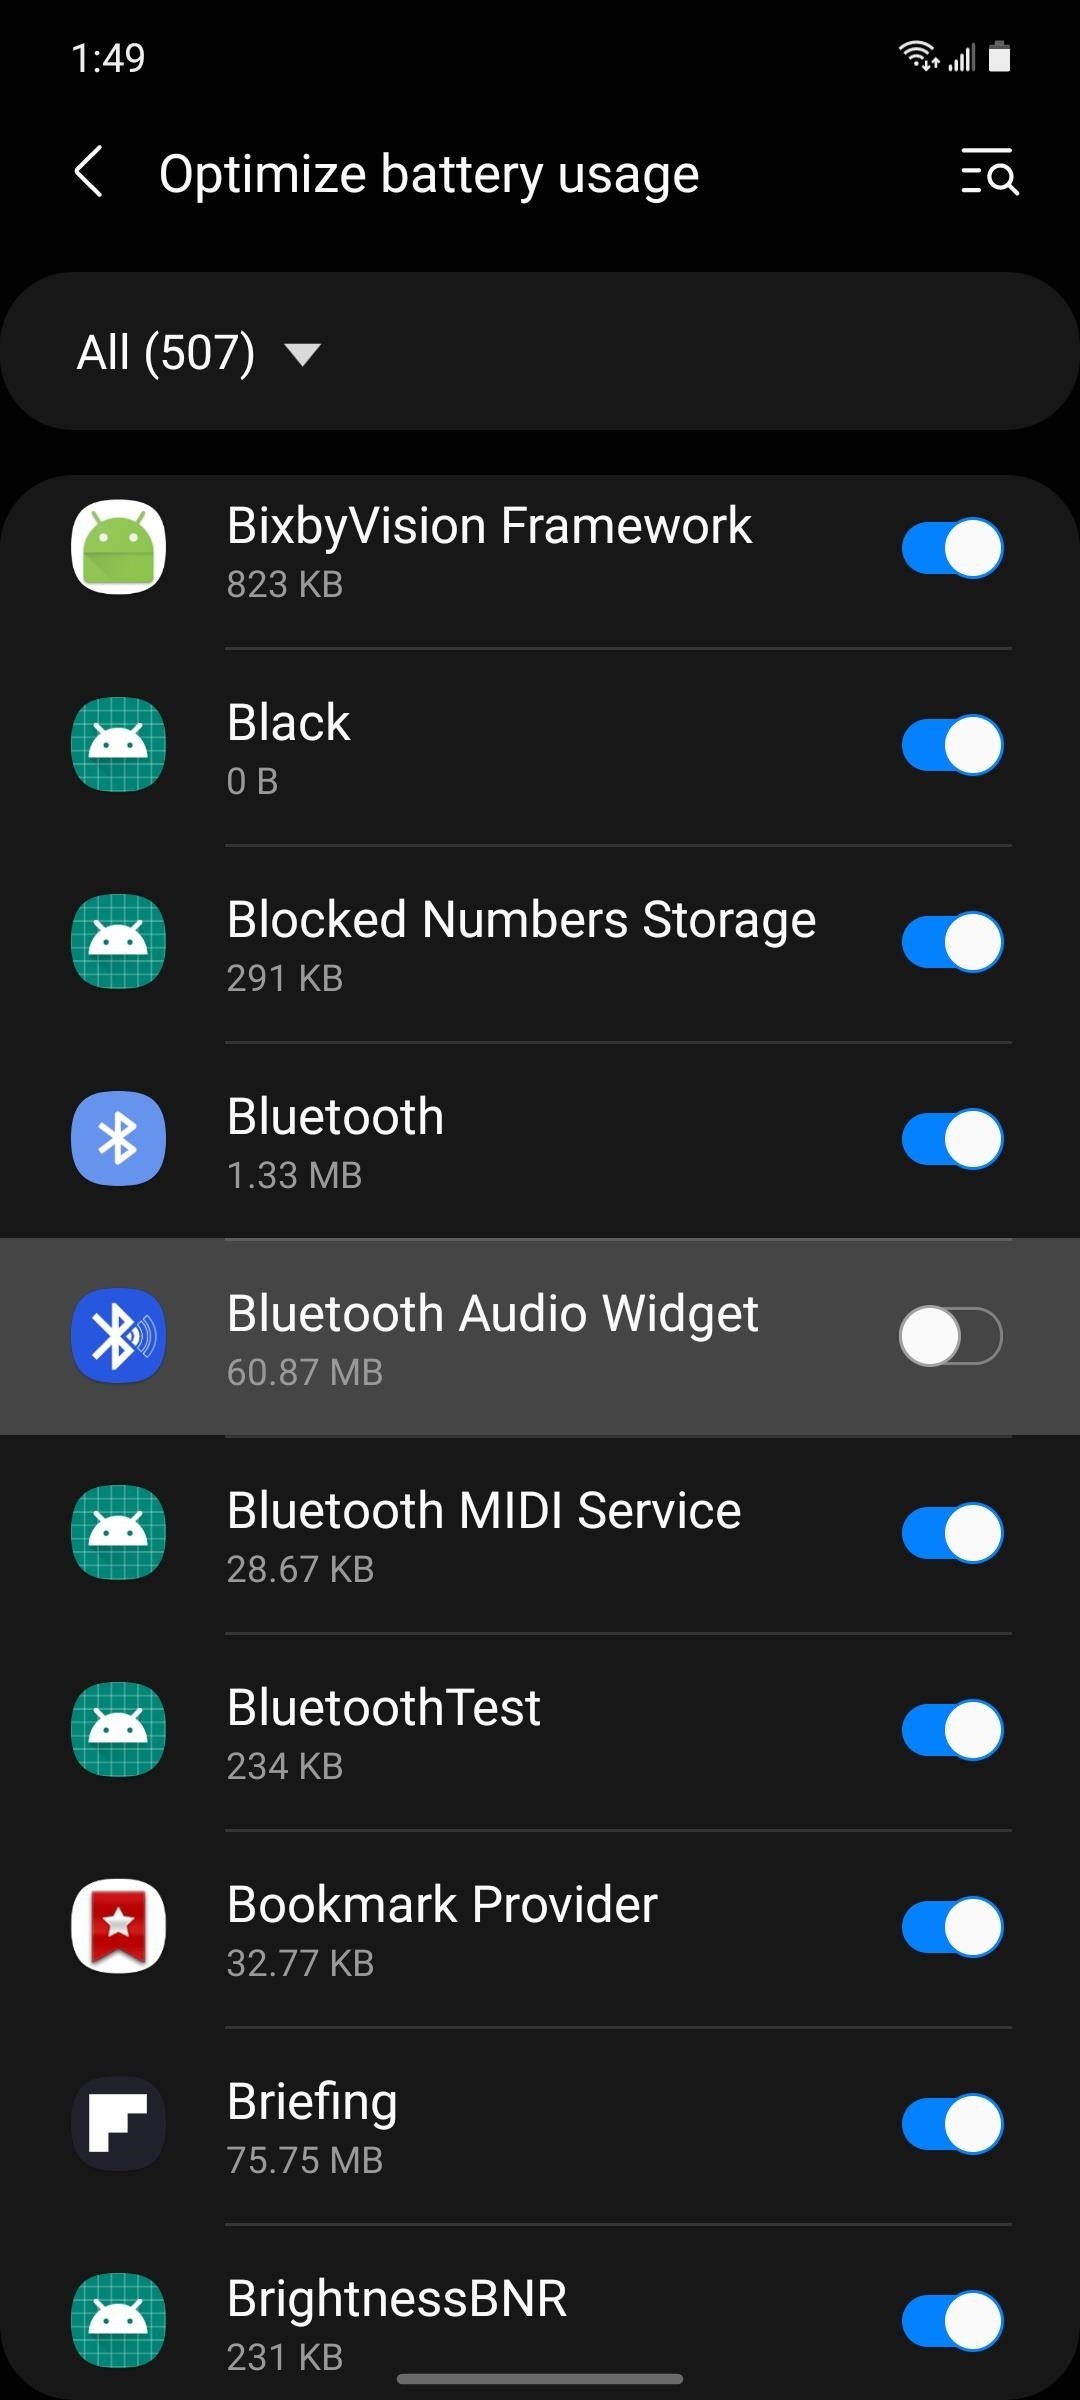 How to Switch Between Bluetooth Accessories in 1 Tap on Android